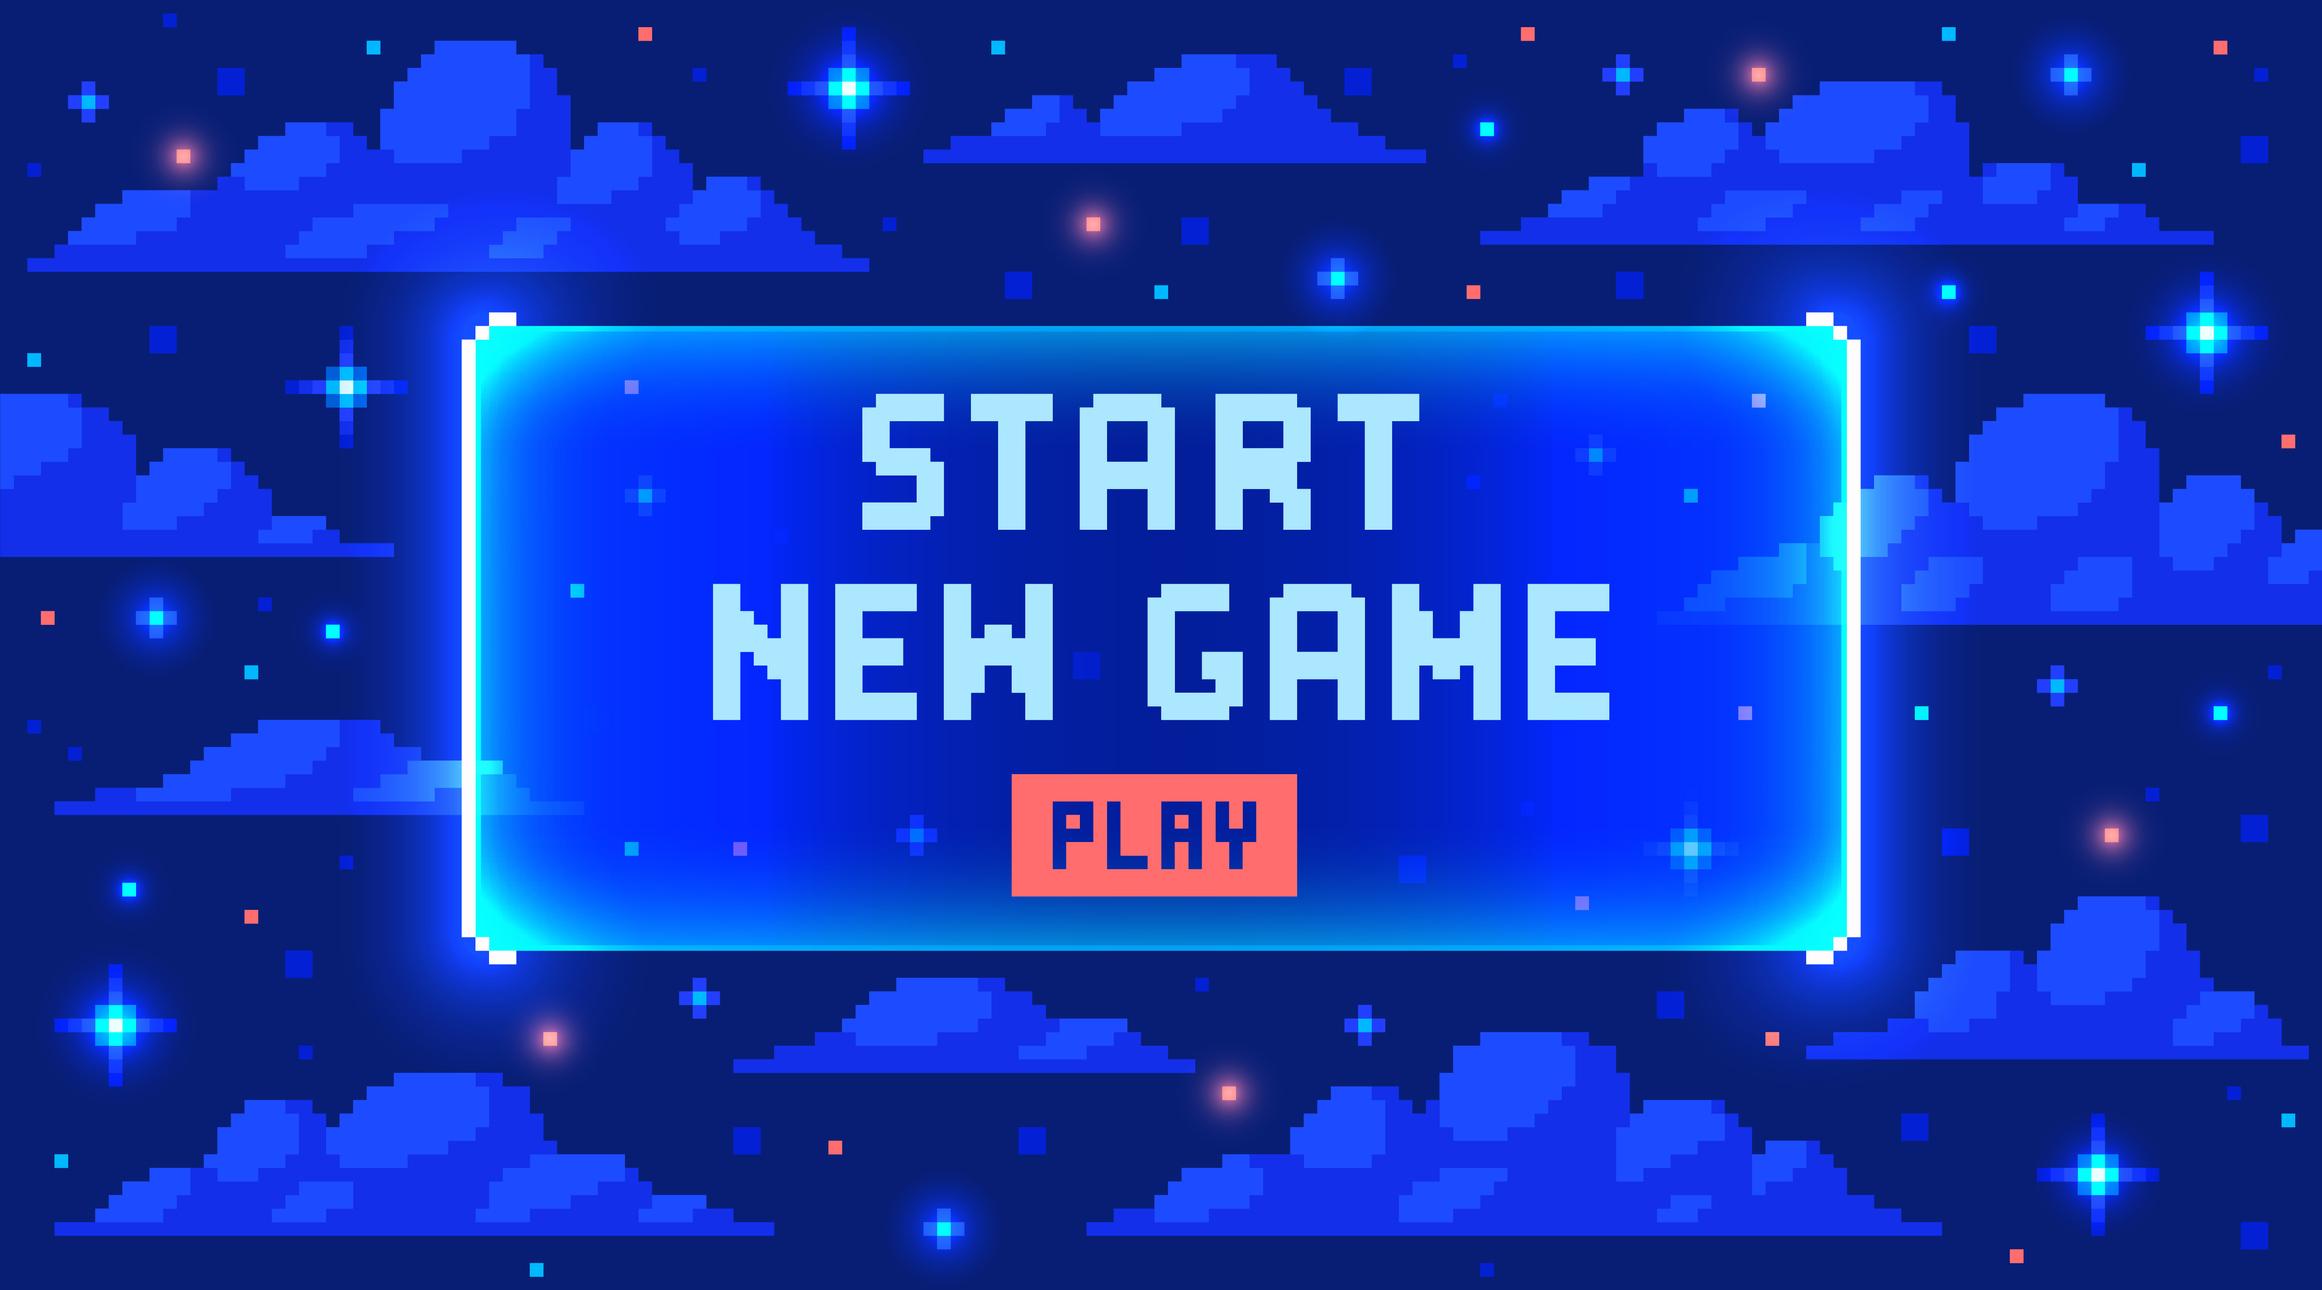  Web banner with phrase Start New Game. Sci-fi screen background with neon design - stock illustration 